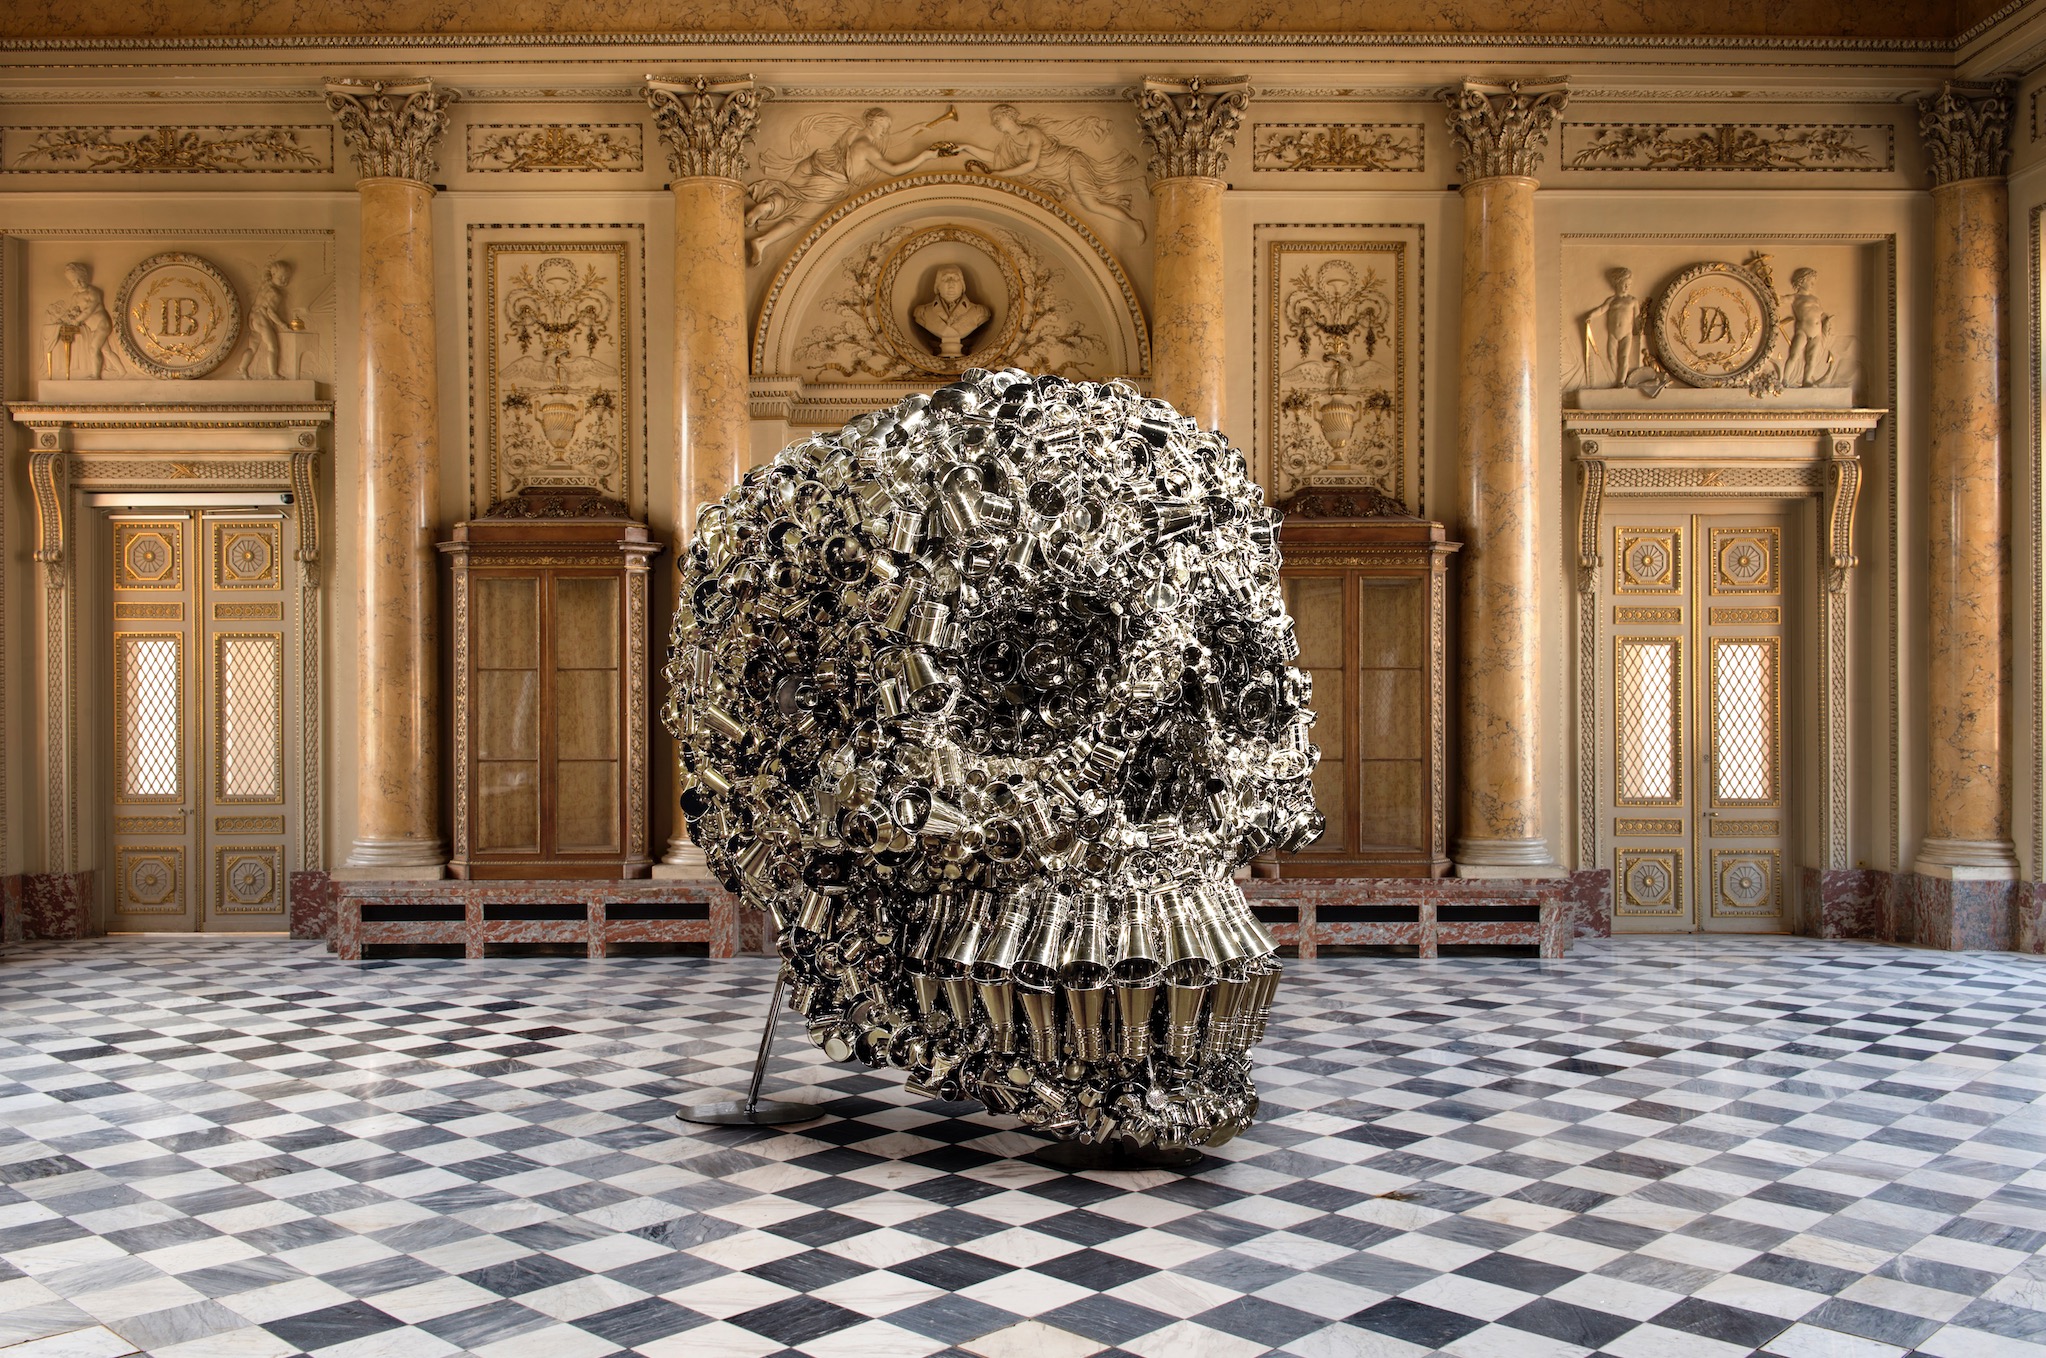 Subodh Gupta Very hungry god Collection F. Pinault - Nuit blanche 2006, Eglise St Bernard, Paris